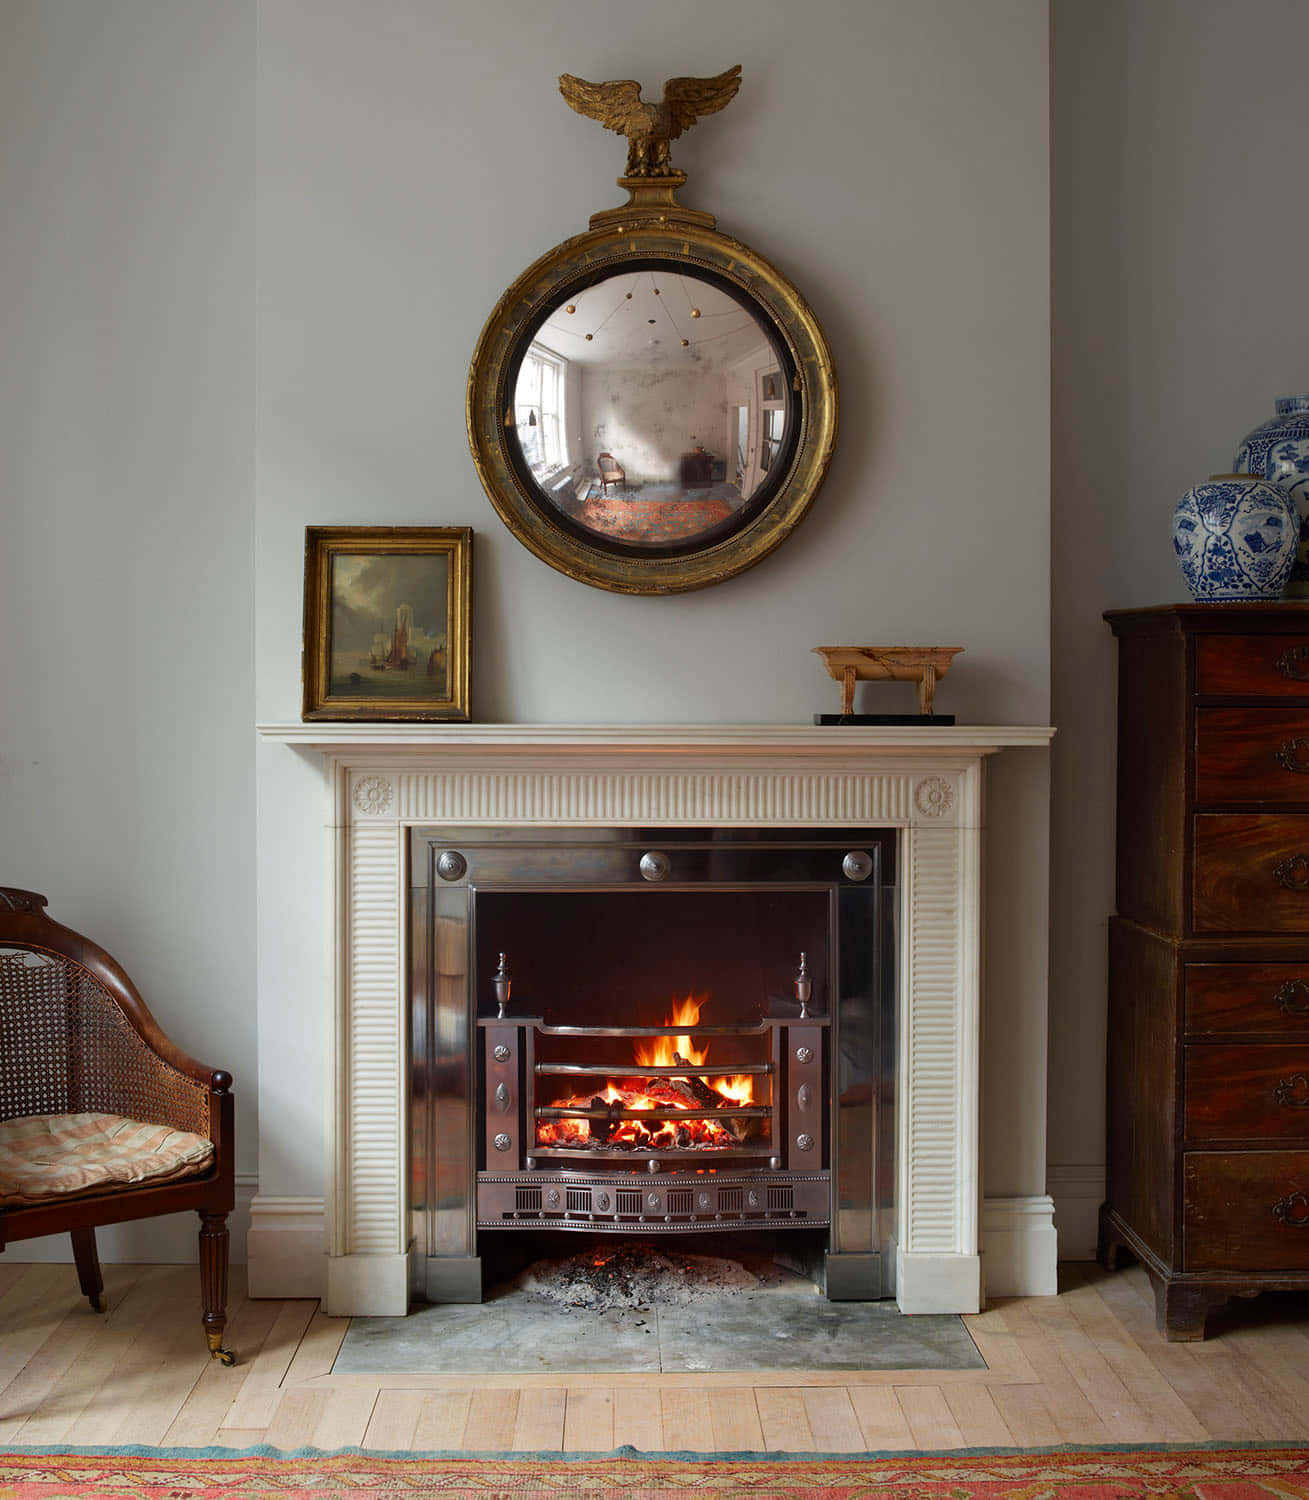 A Fireplace In A Room With A Chair And A Mirror